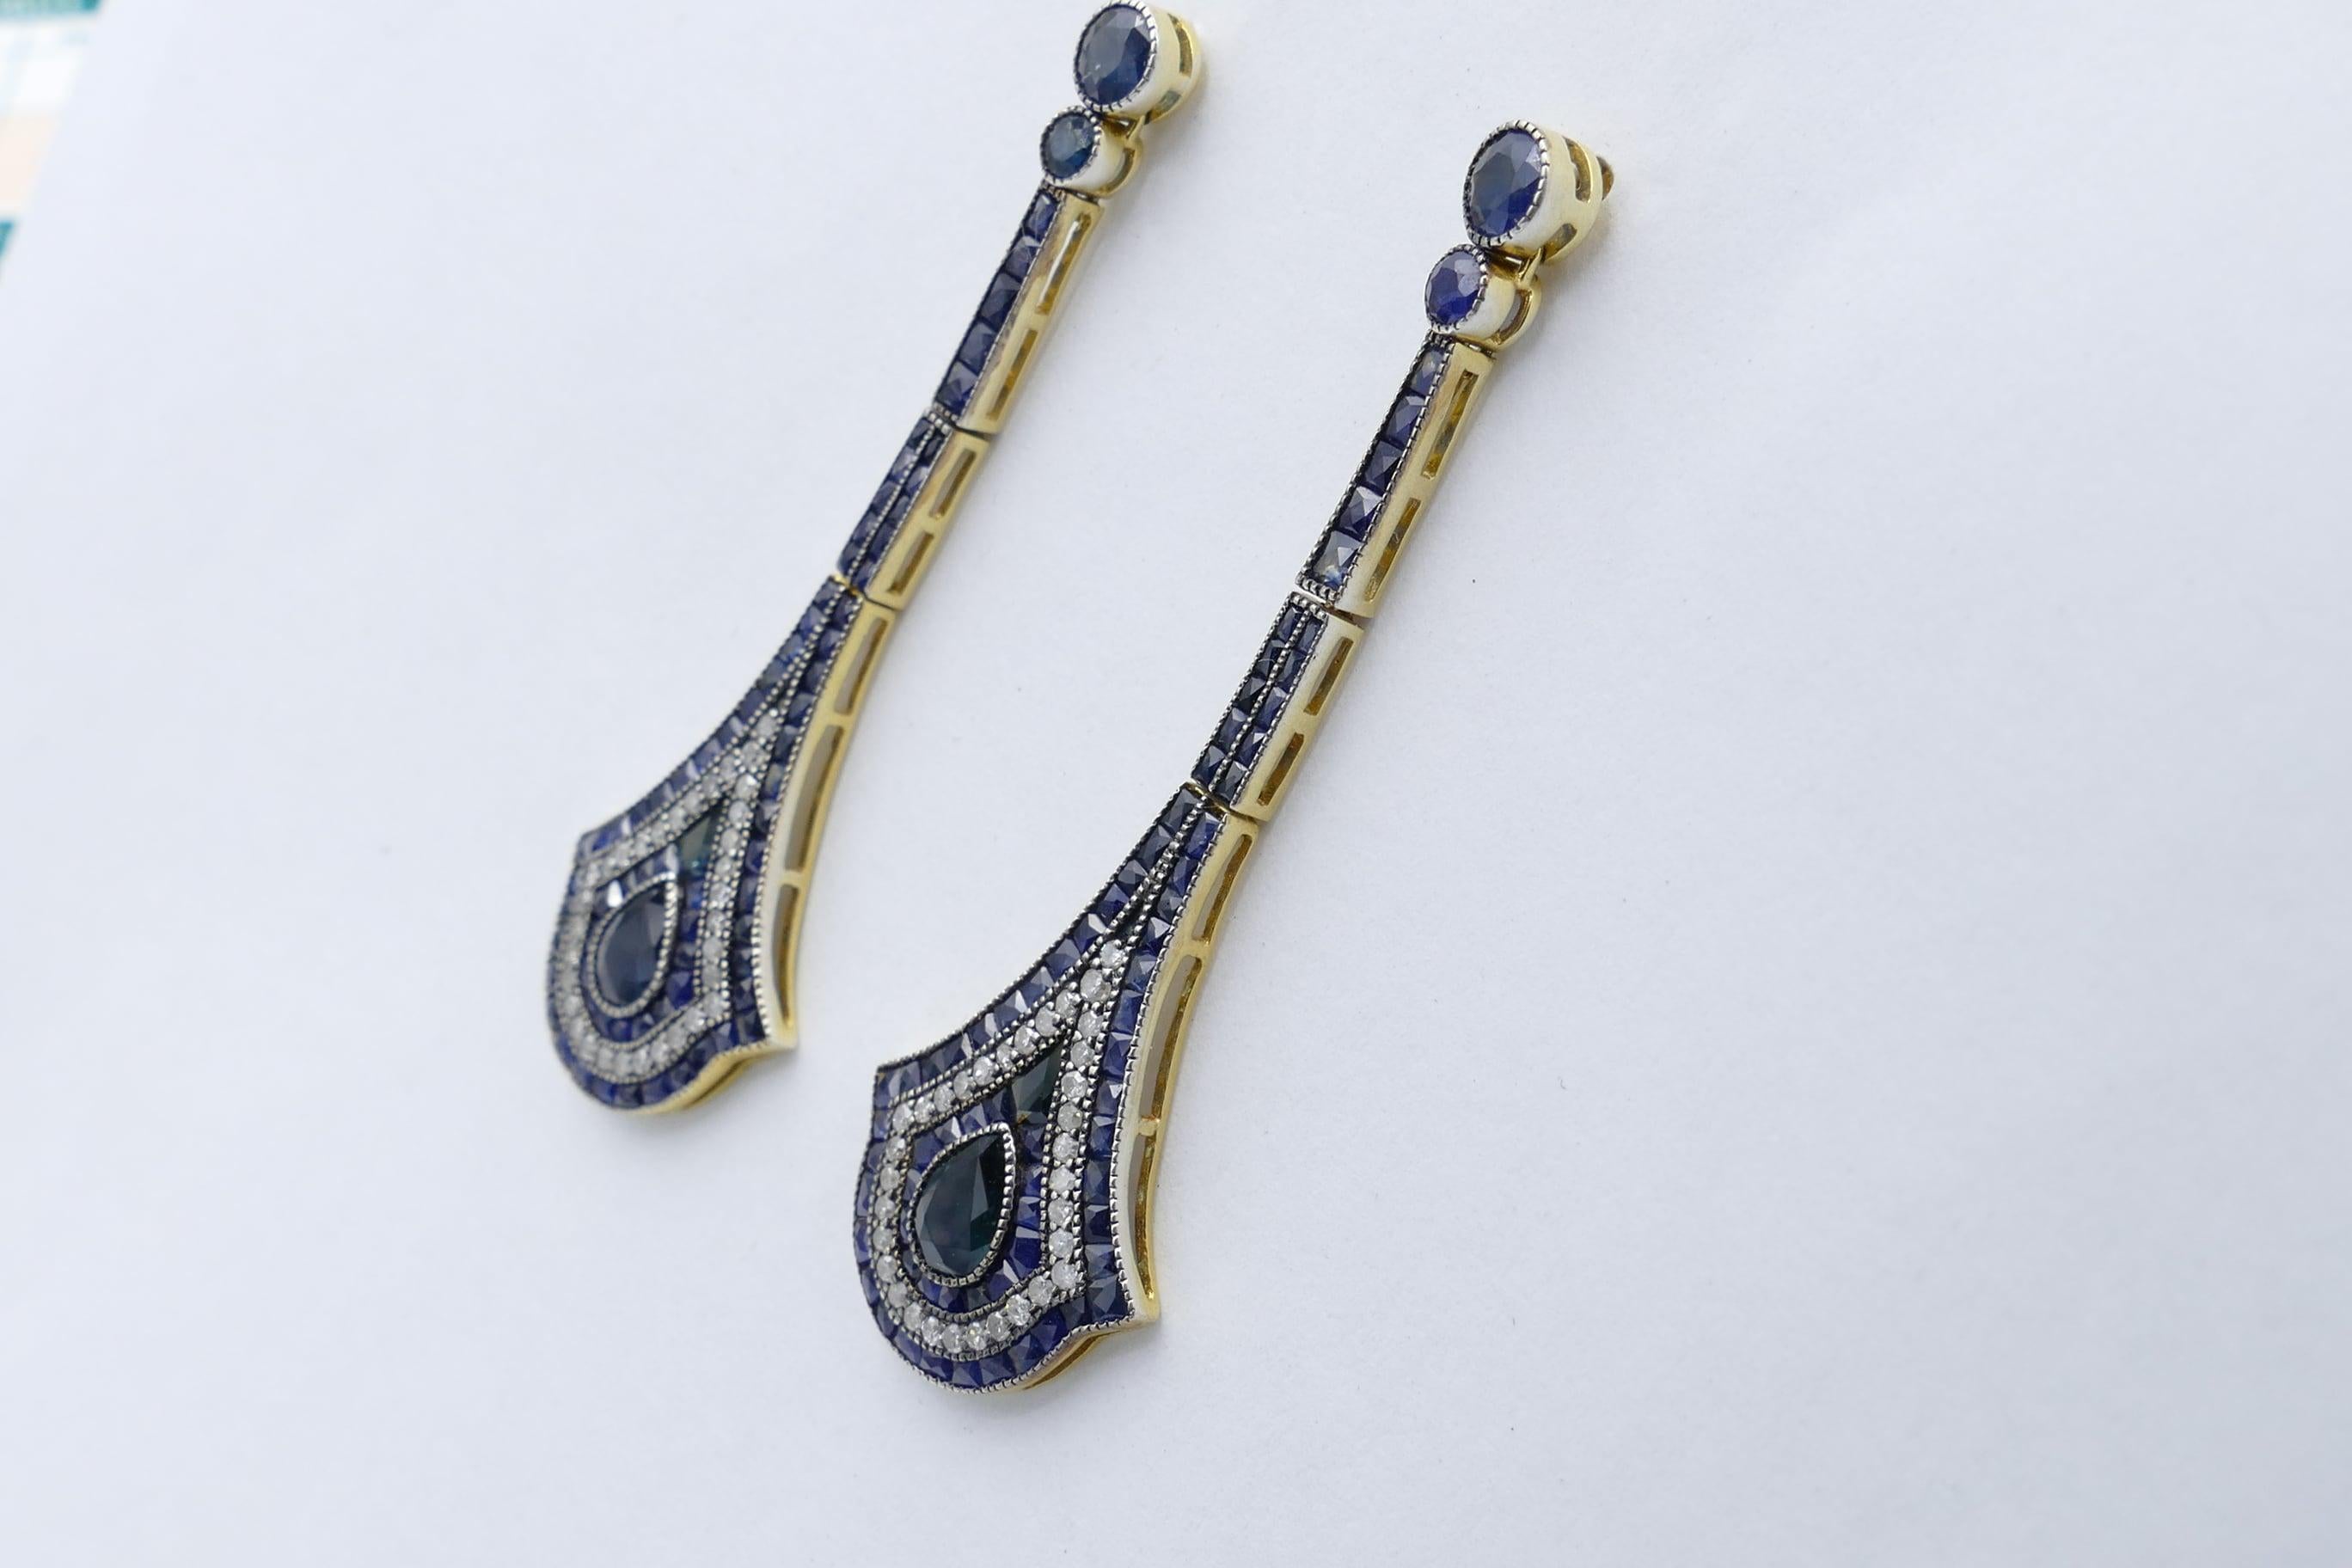 A multitude of Sapphires is the major attraction of these gorgeously attractive earrings.
Deep blue - close to navy, is the predominant colour of the sapphires and they are set in several different ways - brilliant cut, carre cut, pear cut and the